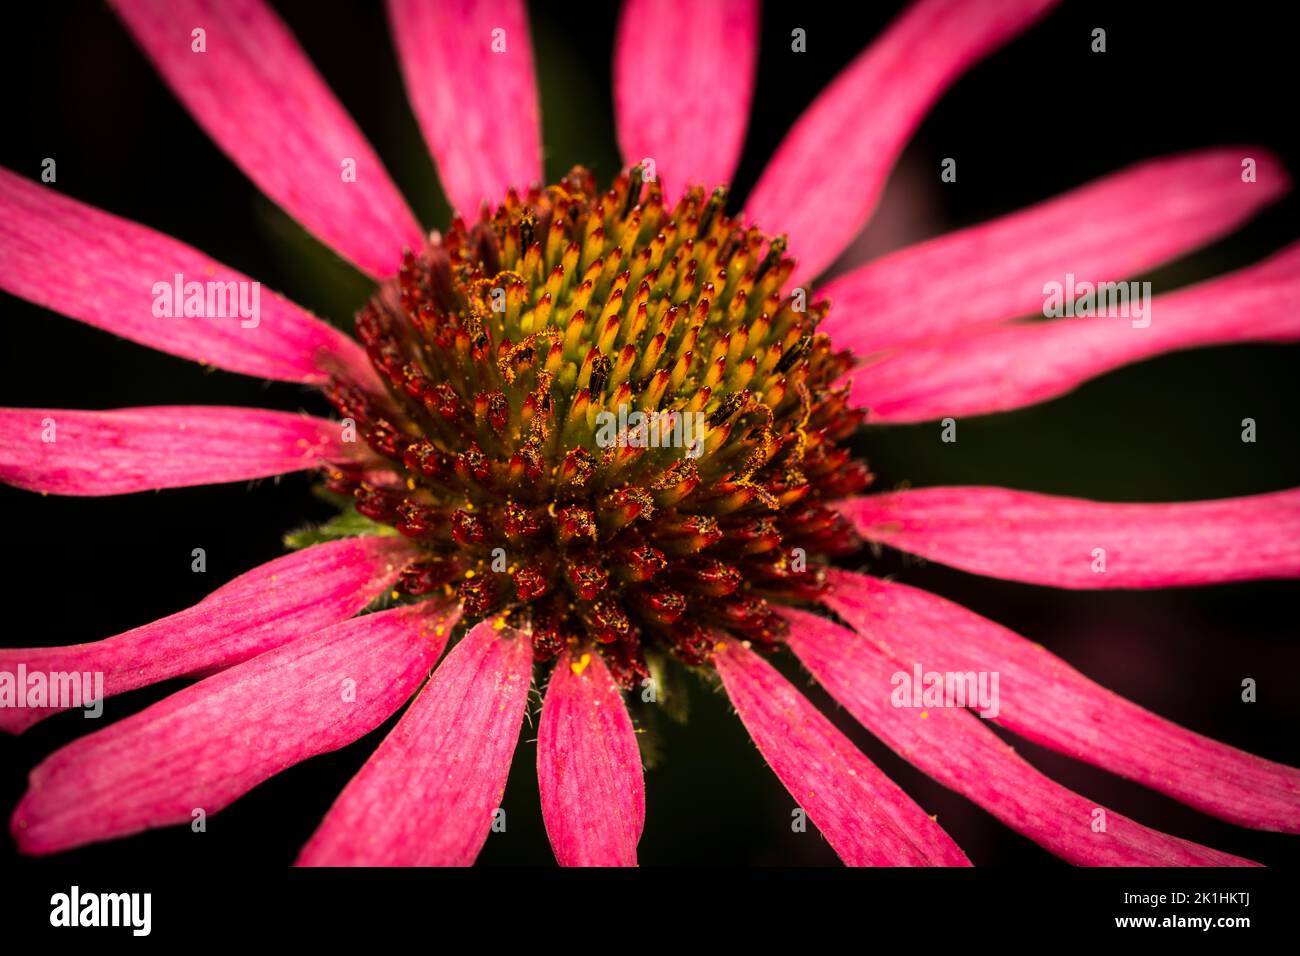 Magnificent echinacea flower in close-up Stock Photo